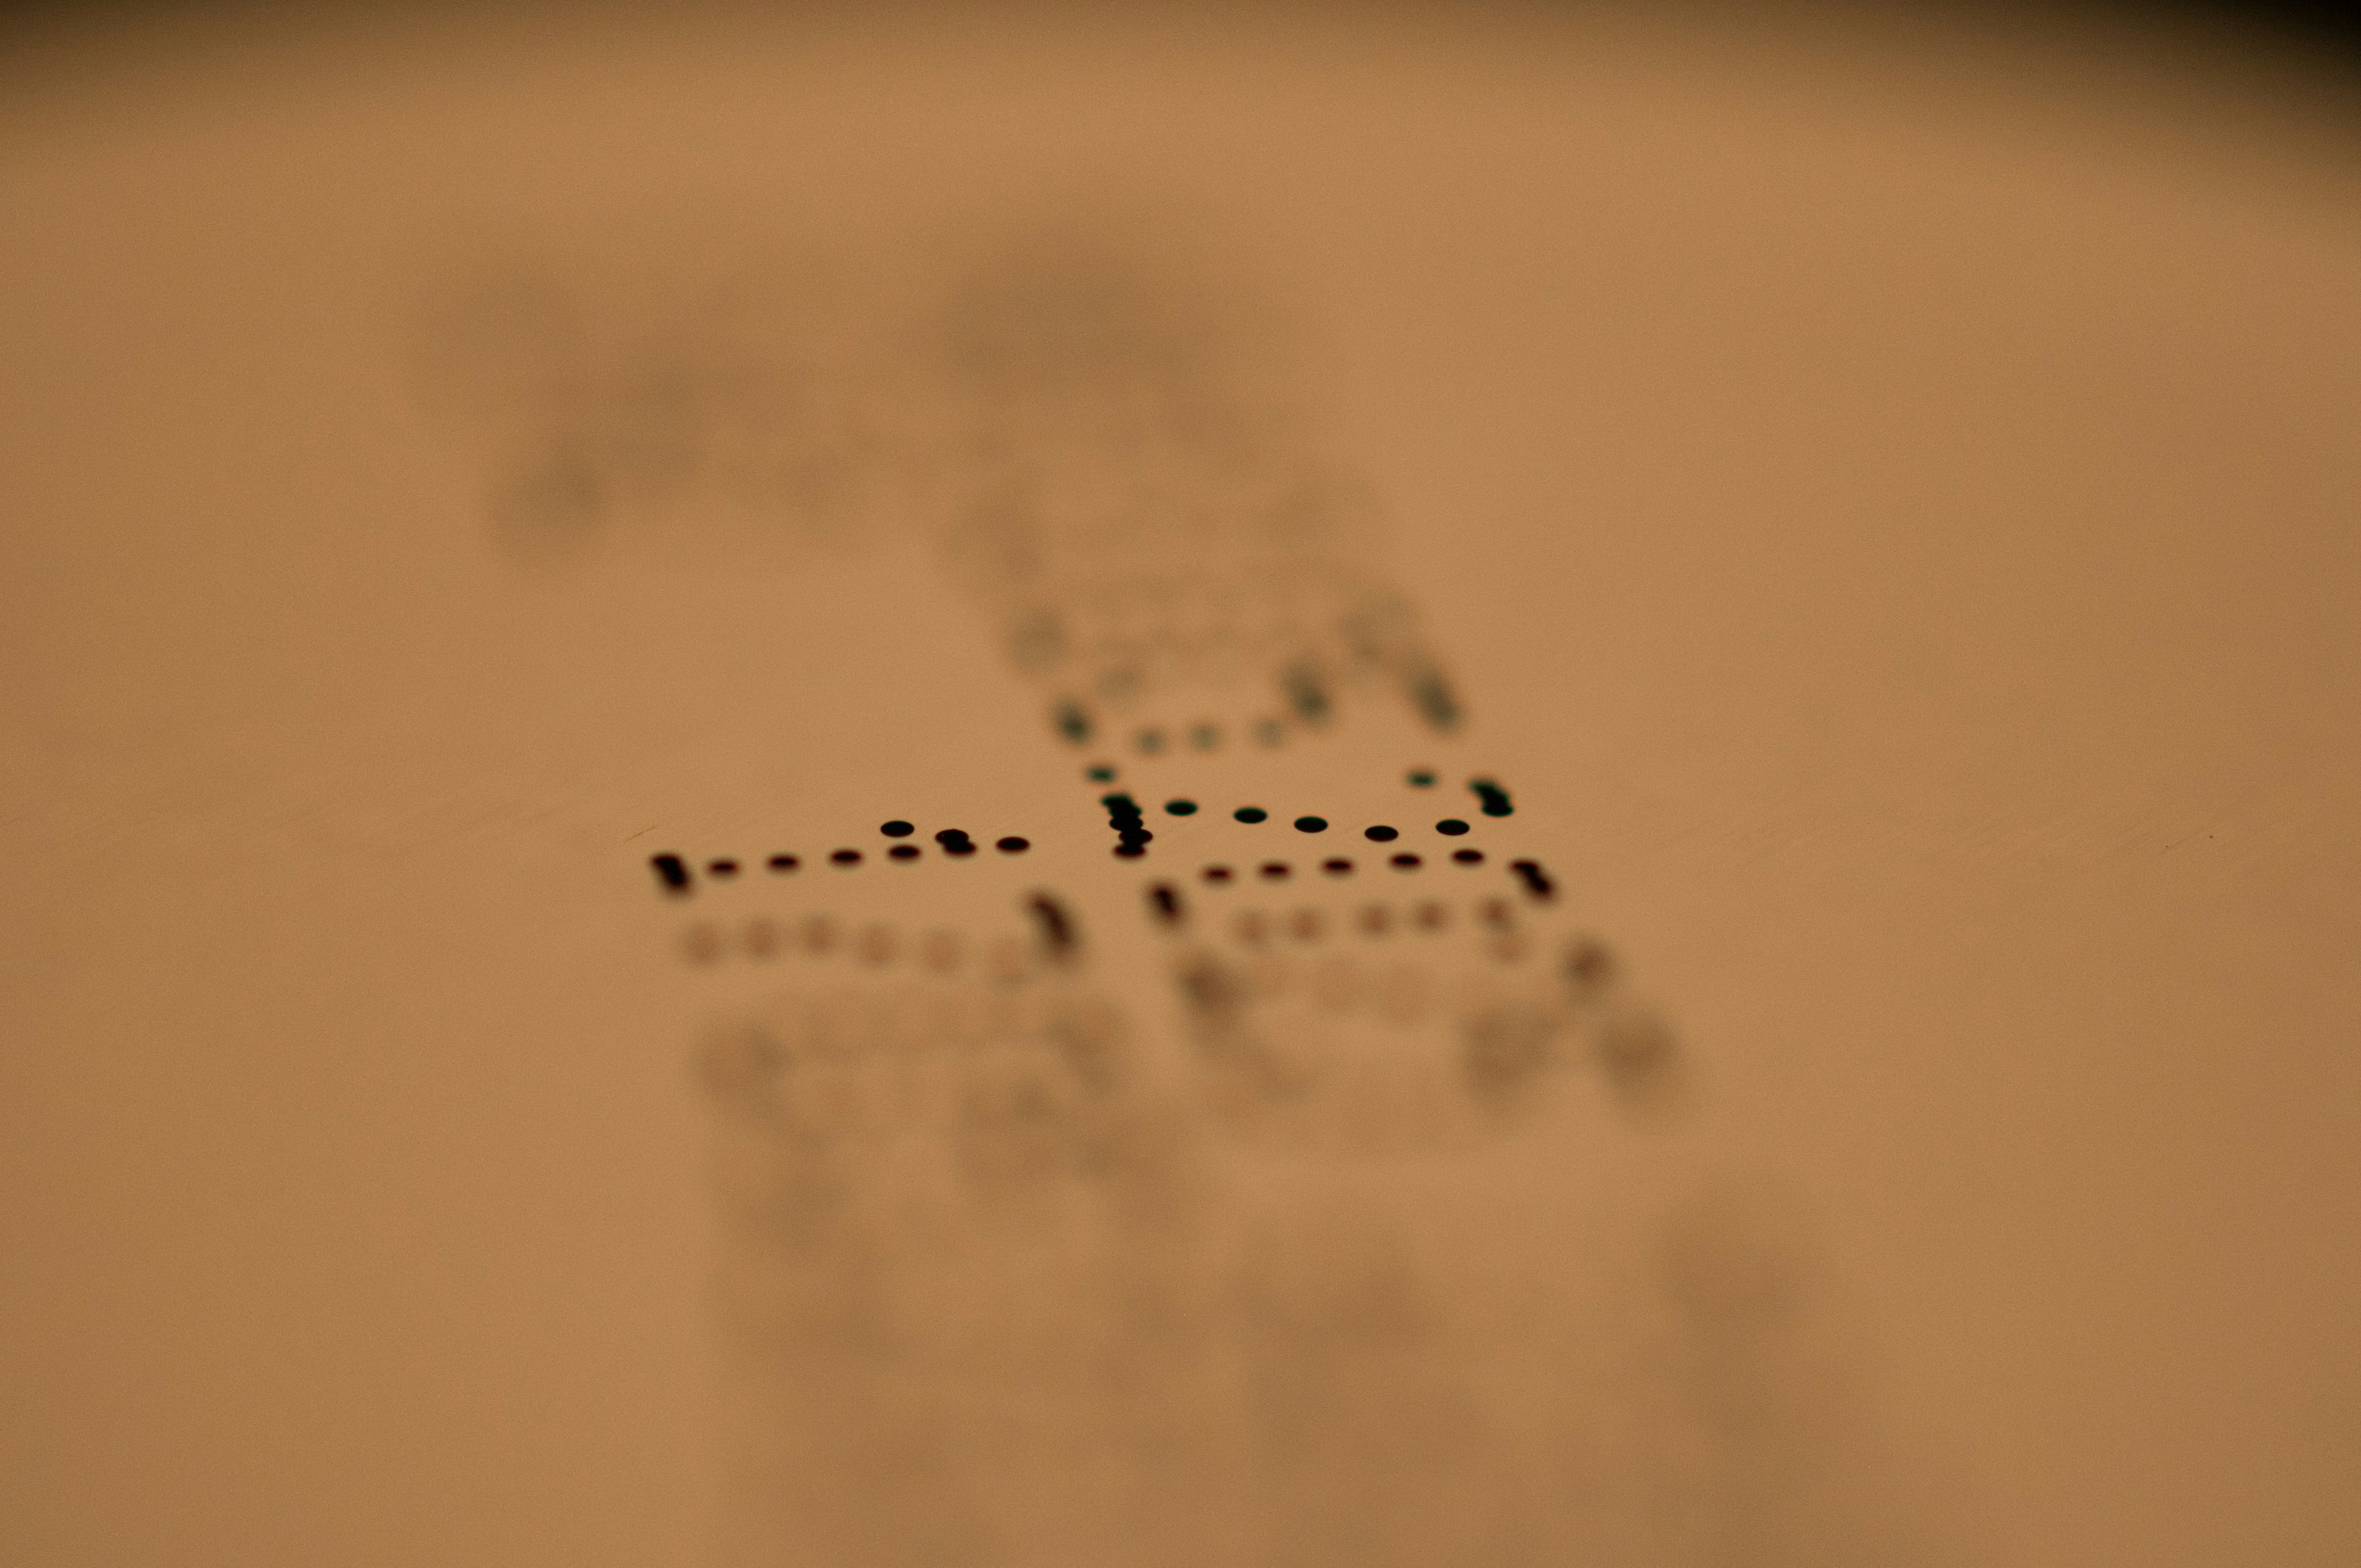 A dimly lit page with numbers on it, the picture is blurred toward the edges with the camera focusing on two numbers in the middle